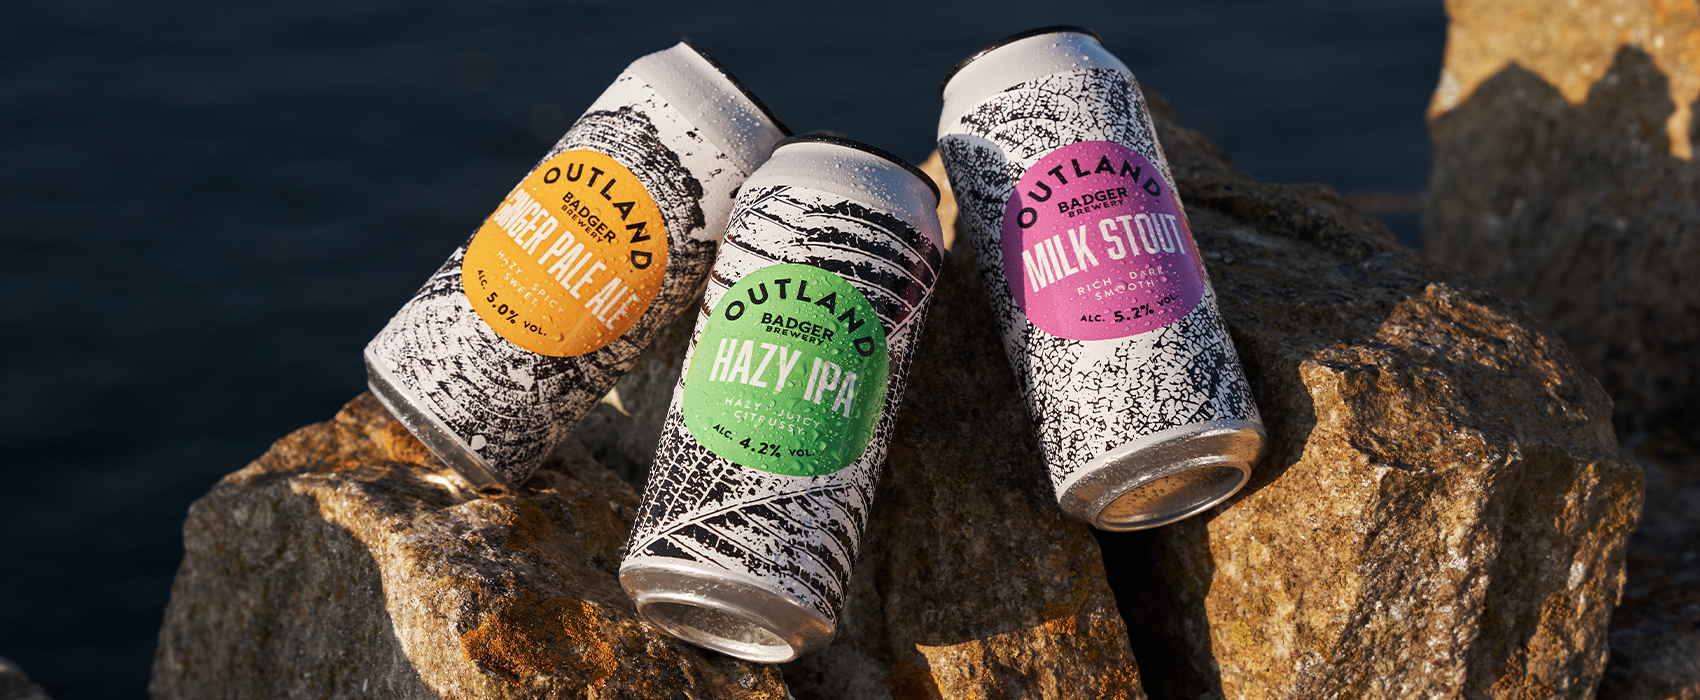 What is craft beer? | Outland cans